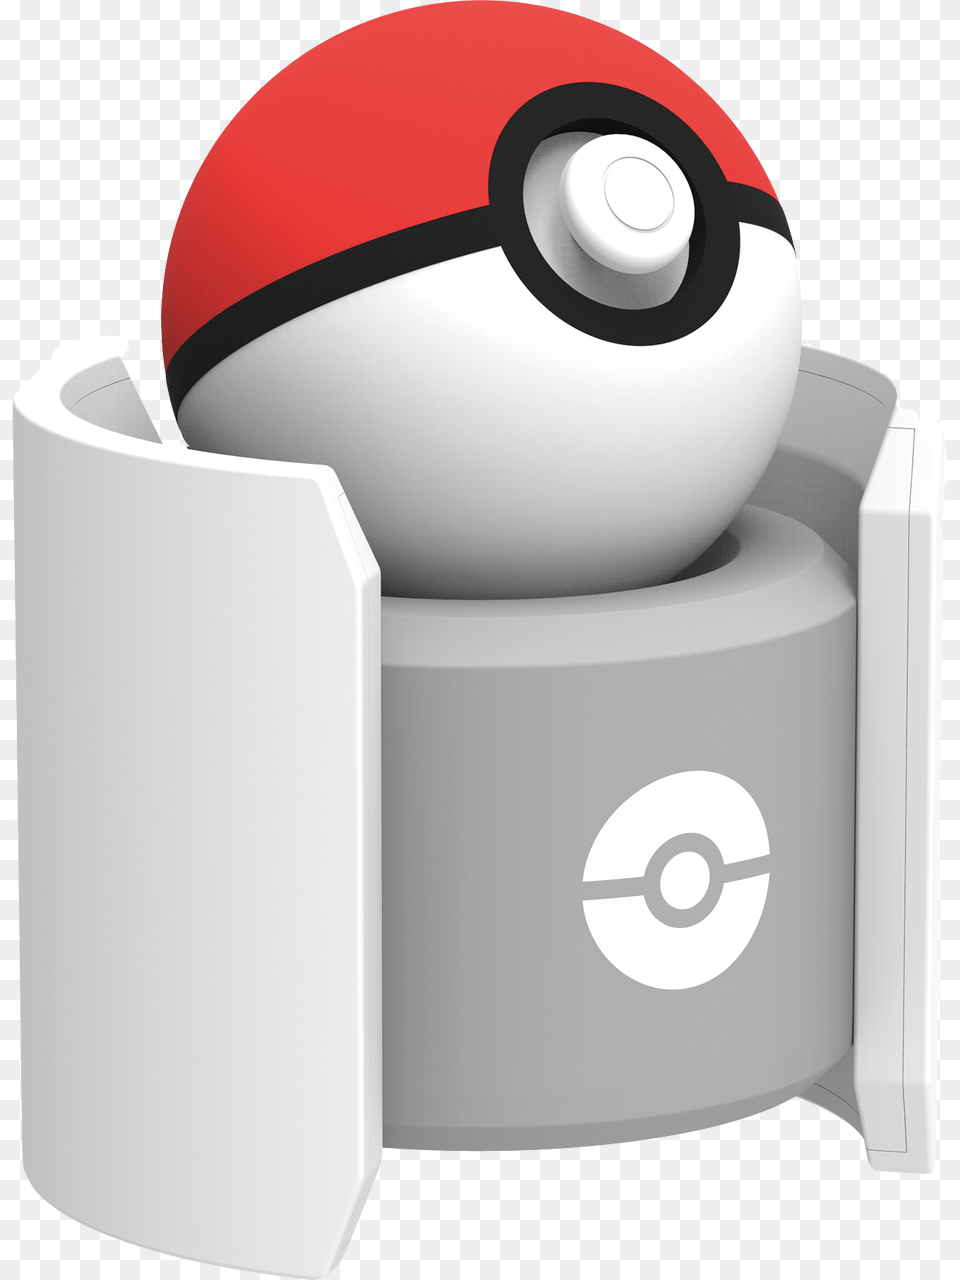 Pok Ball Plus Charge Stand For Nintendo Switch Pokeball Plus Charge Stand, Sphere, Camera, Electronics Png Image